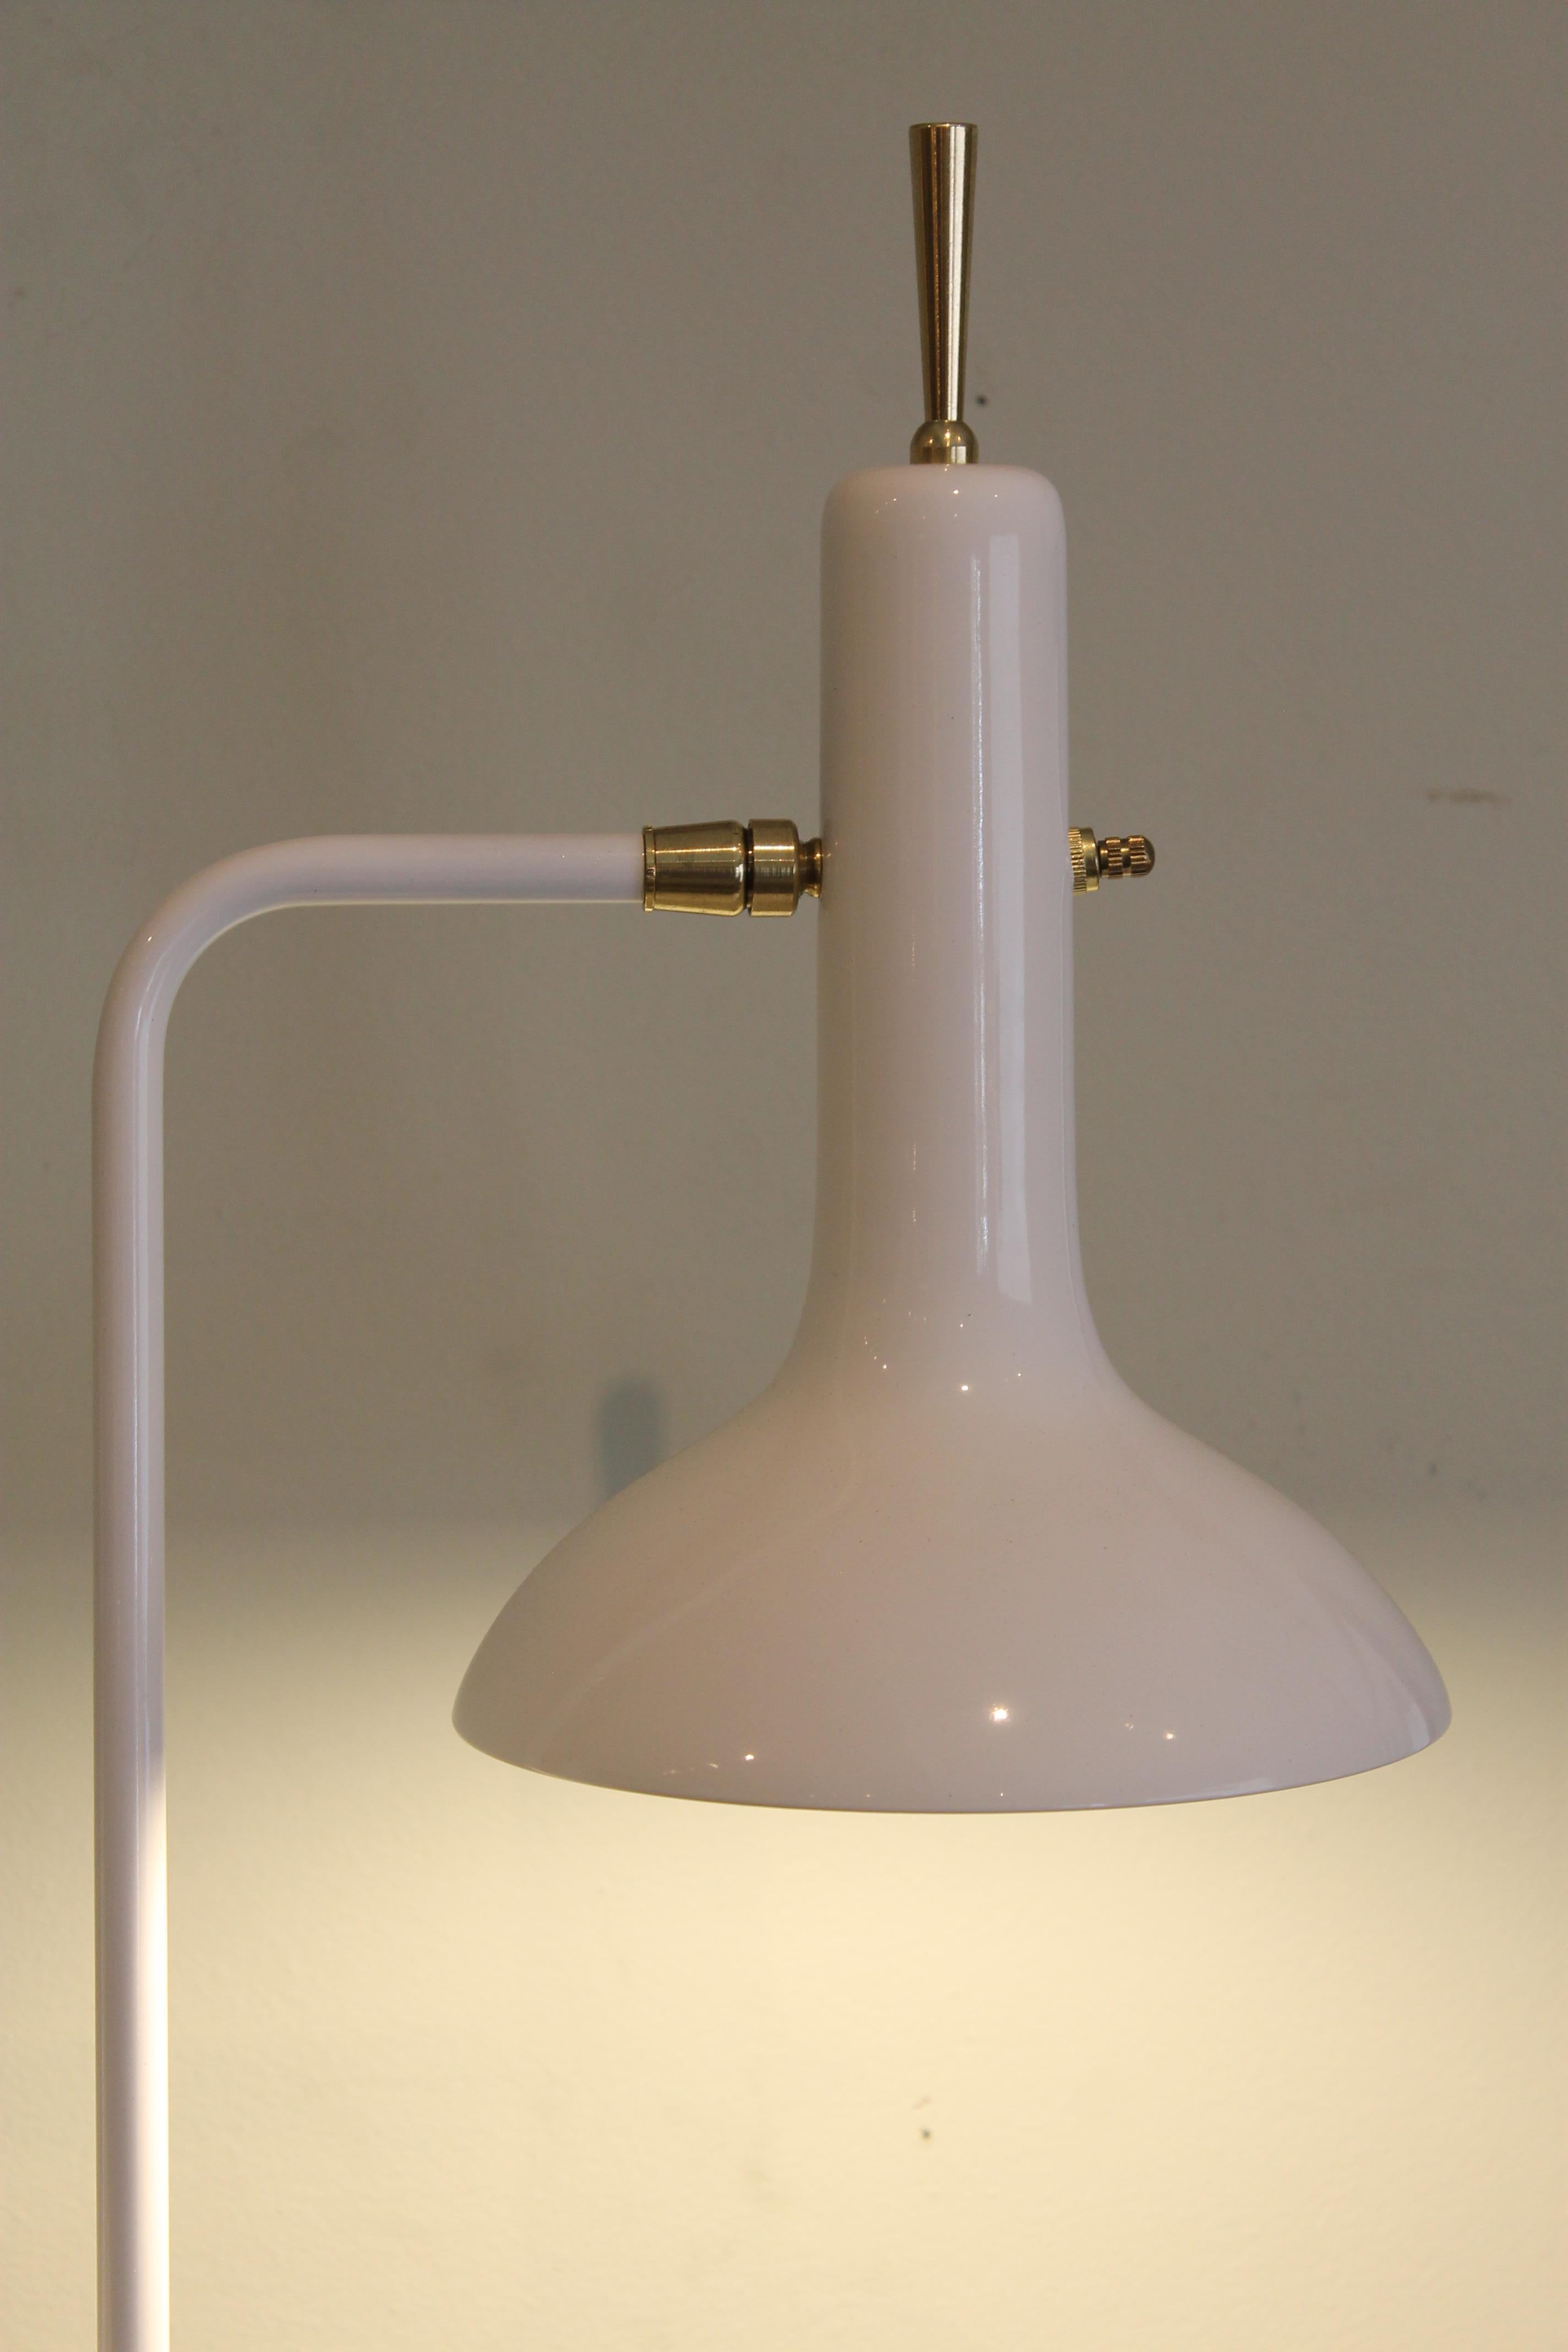 Double Cone Floor Lamp by the Laurel Lamp Mfg. Co. 1